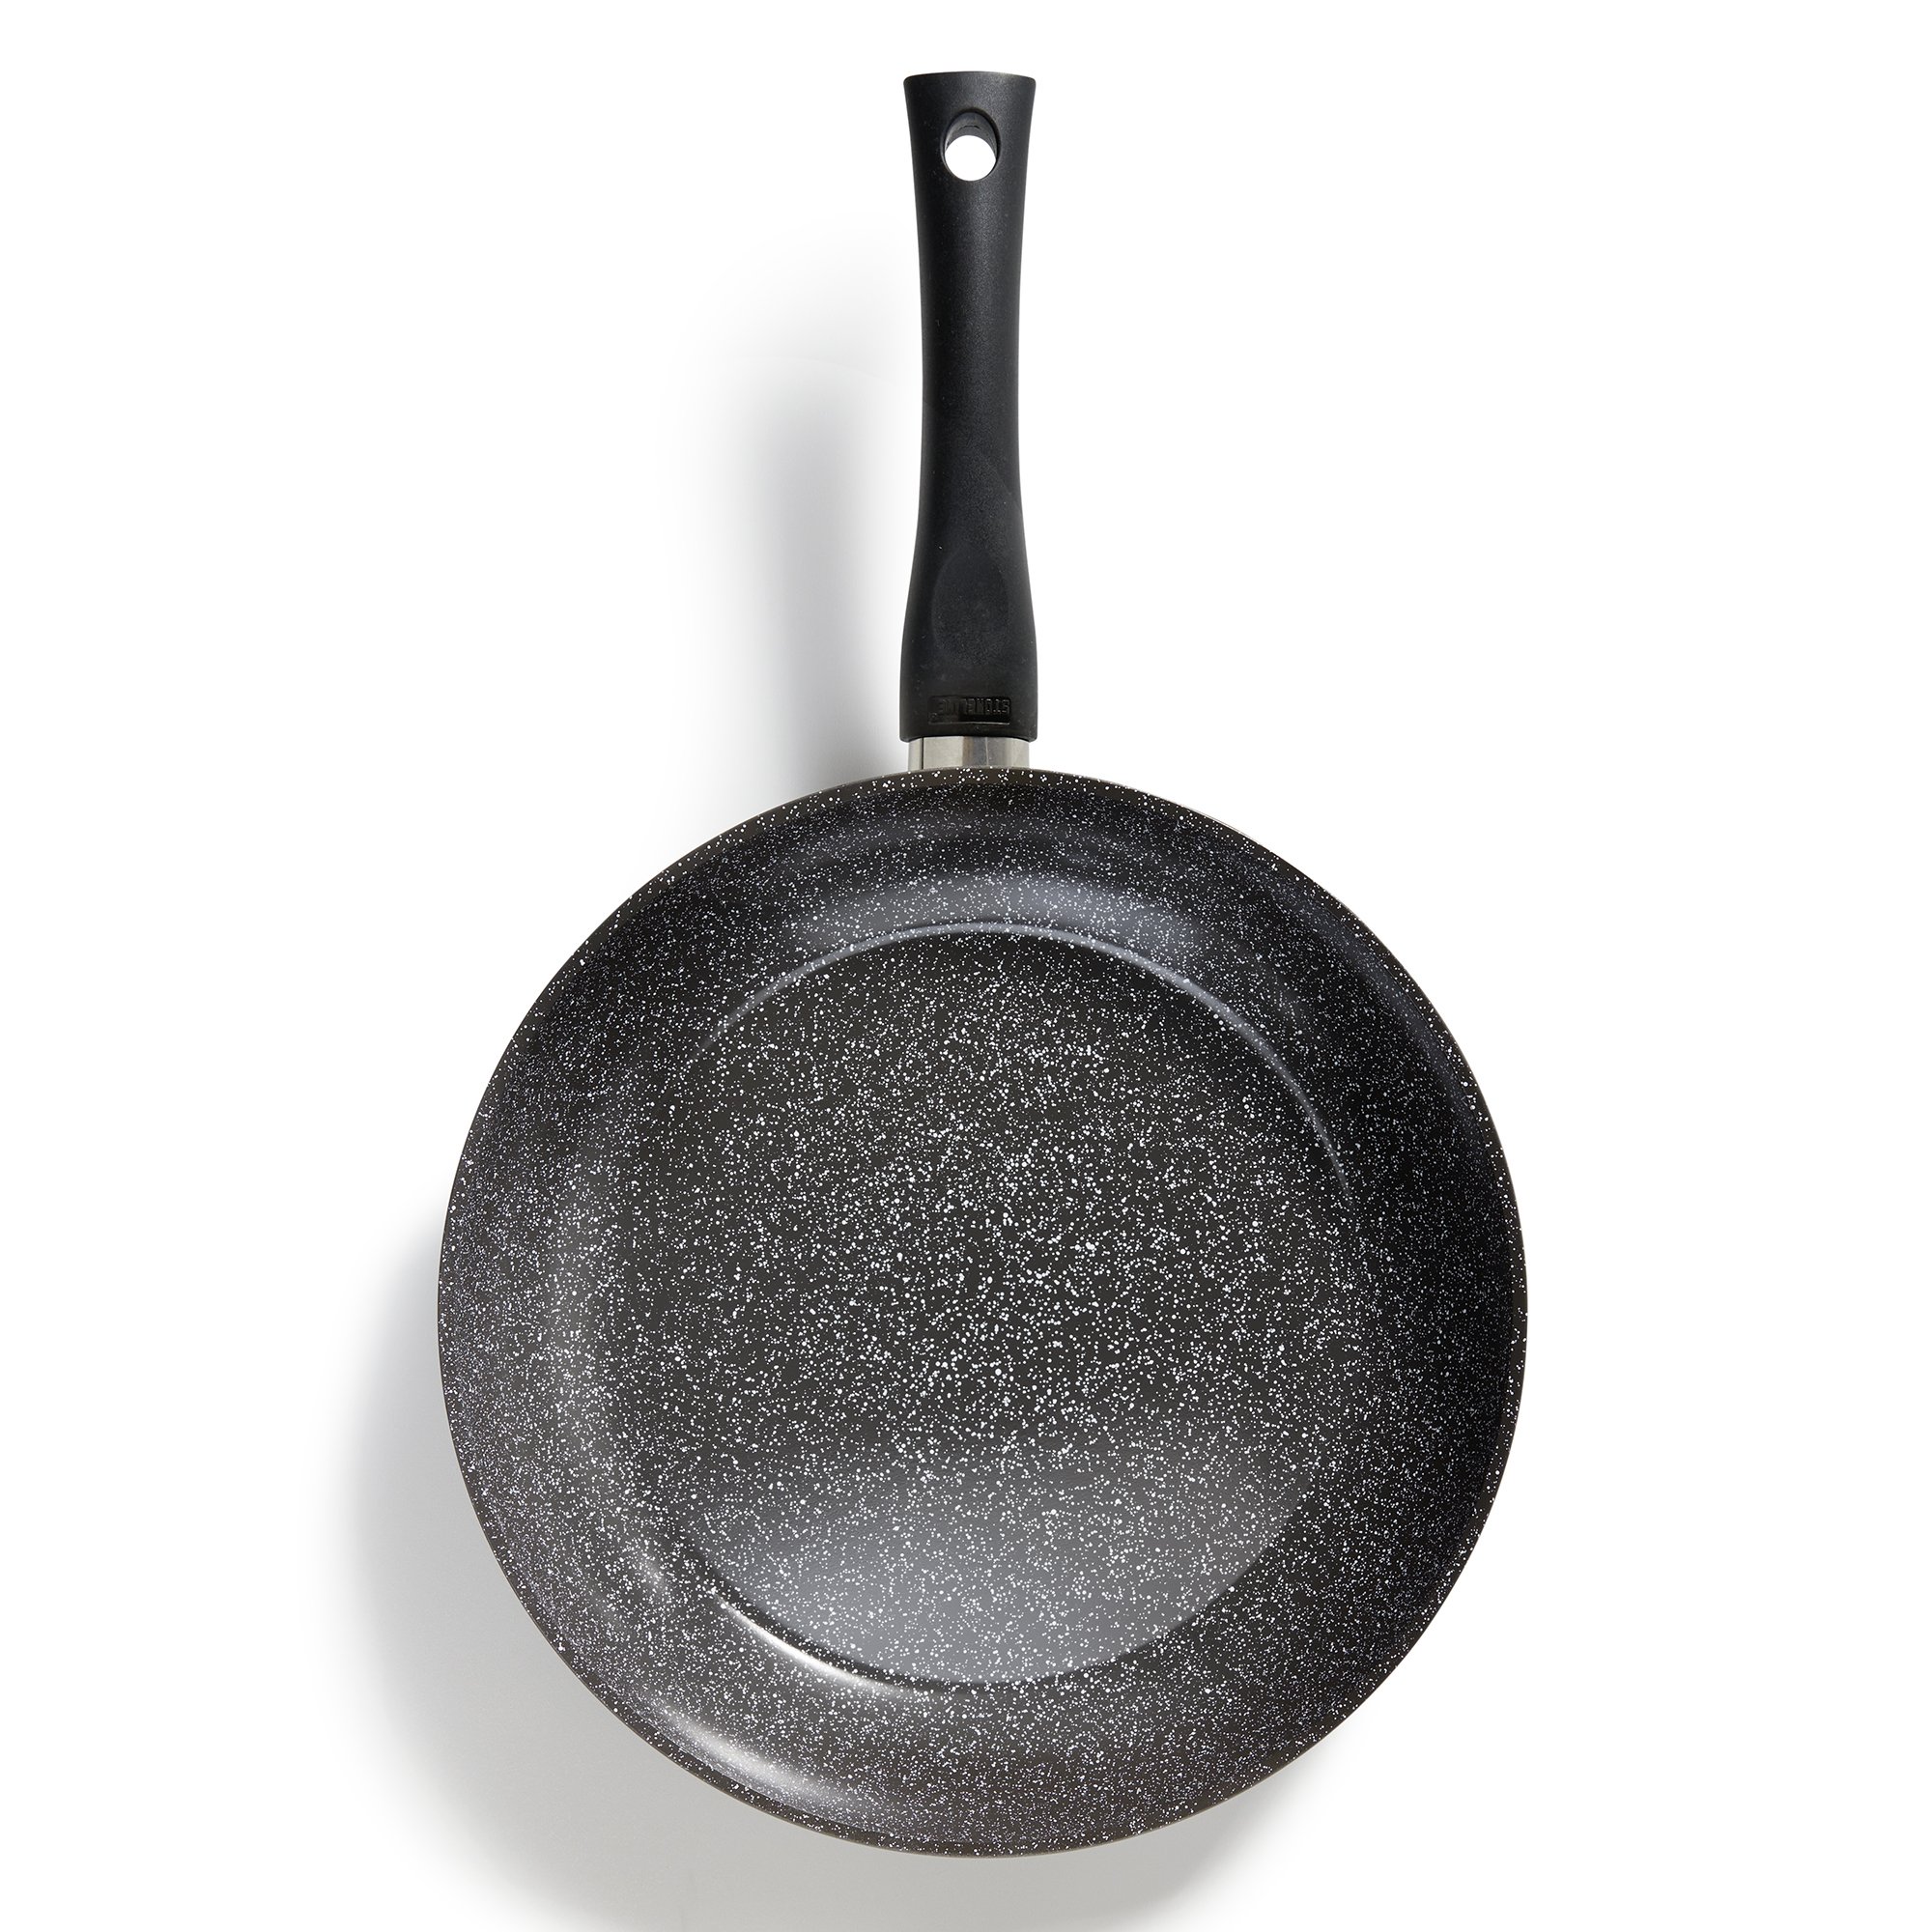 STONELINE® CERAMIC frying pan 28 cm, ceramic coating, with glass lid, suitable for induction